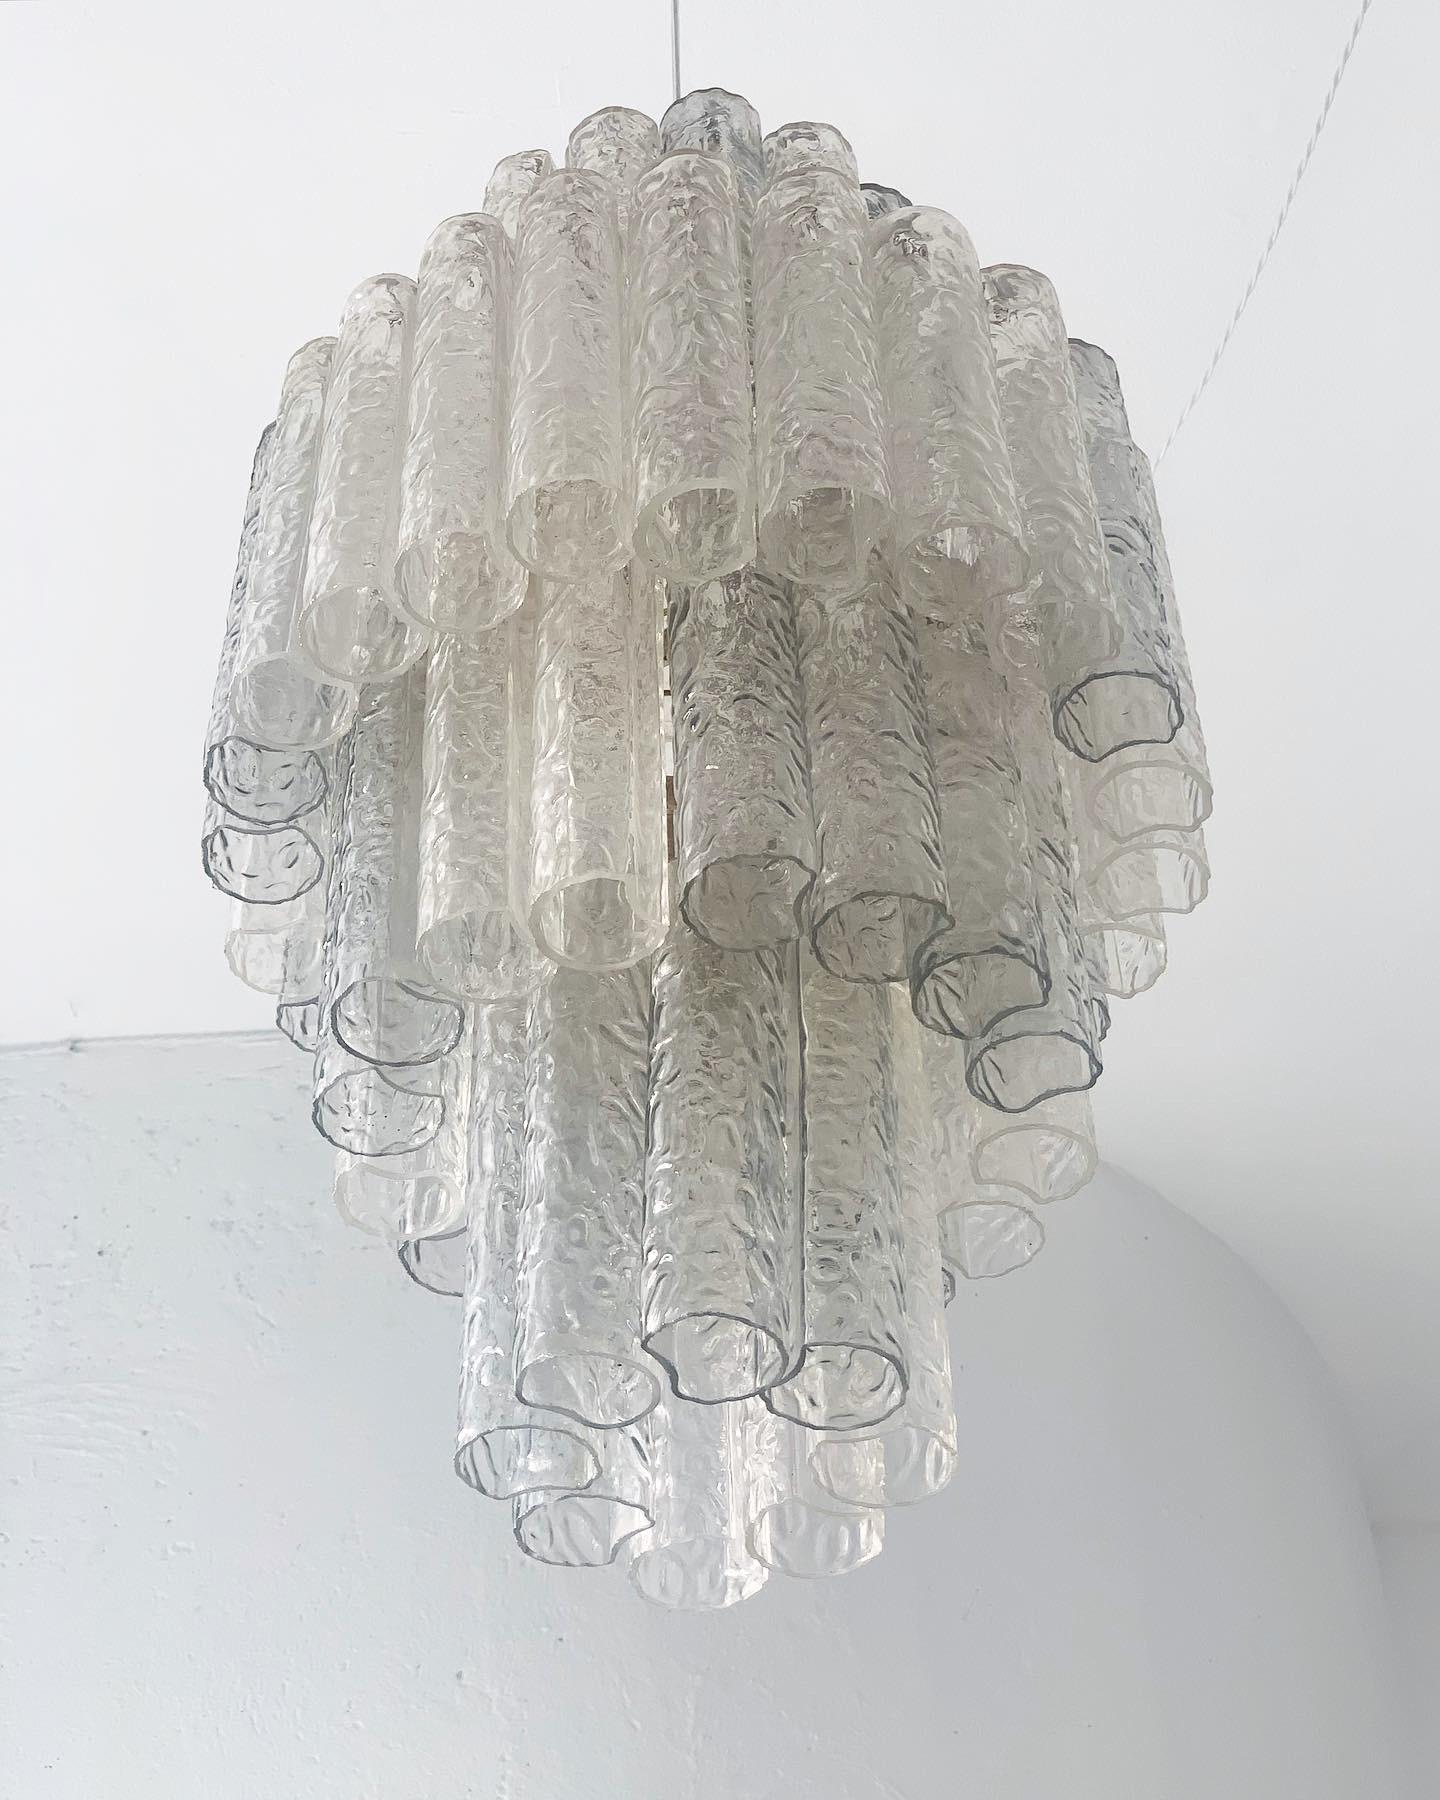 Offered for sale is a big and scenic chandelier in Murano glass, made (obviously) in Italy at the beginning of the 1960s. While the frame and glass pipes are not signed, it is clearly made in the style of Toni Zuccheri and Venini, two of the